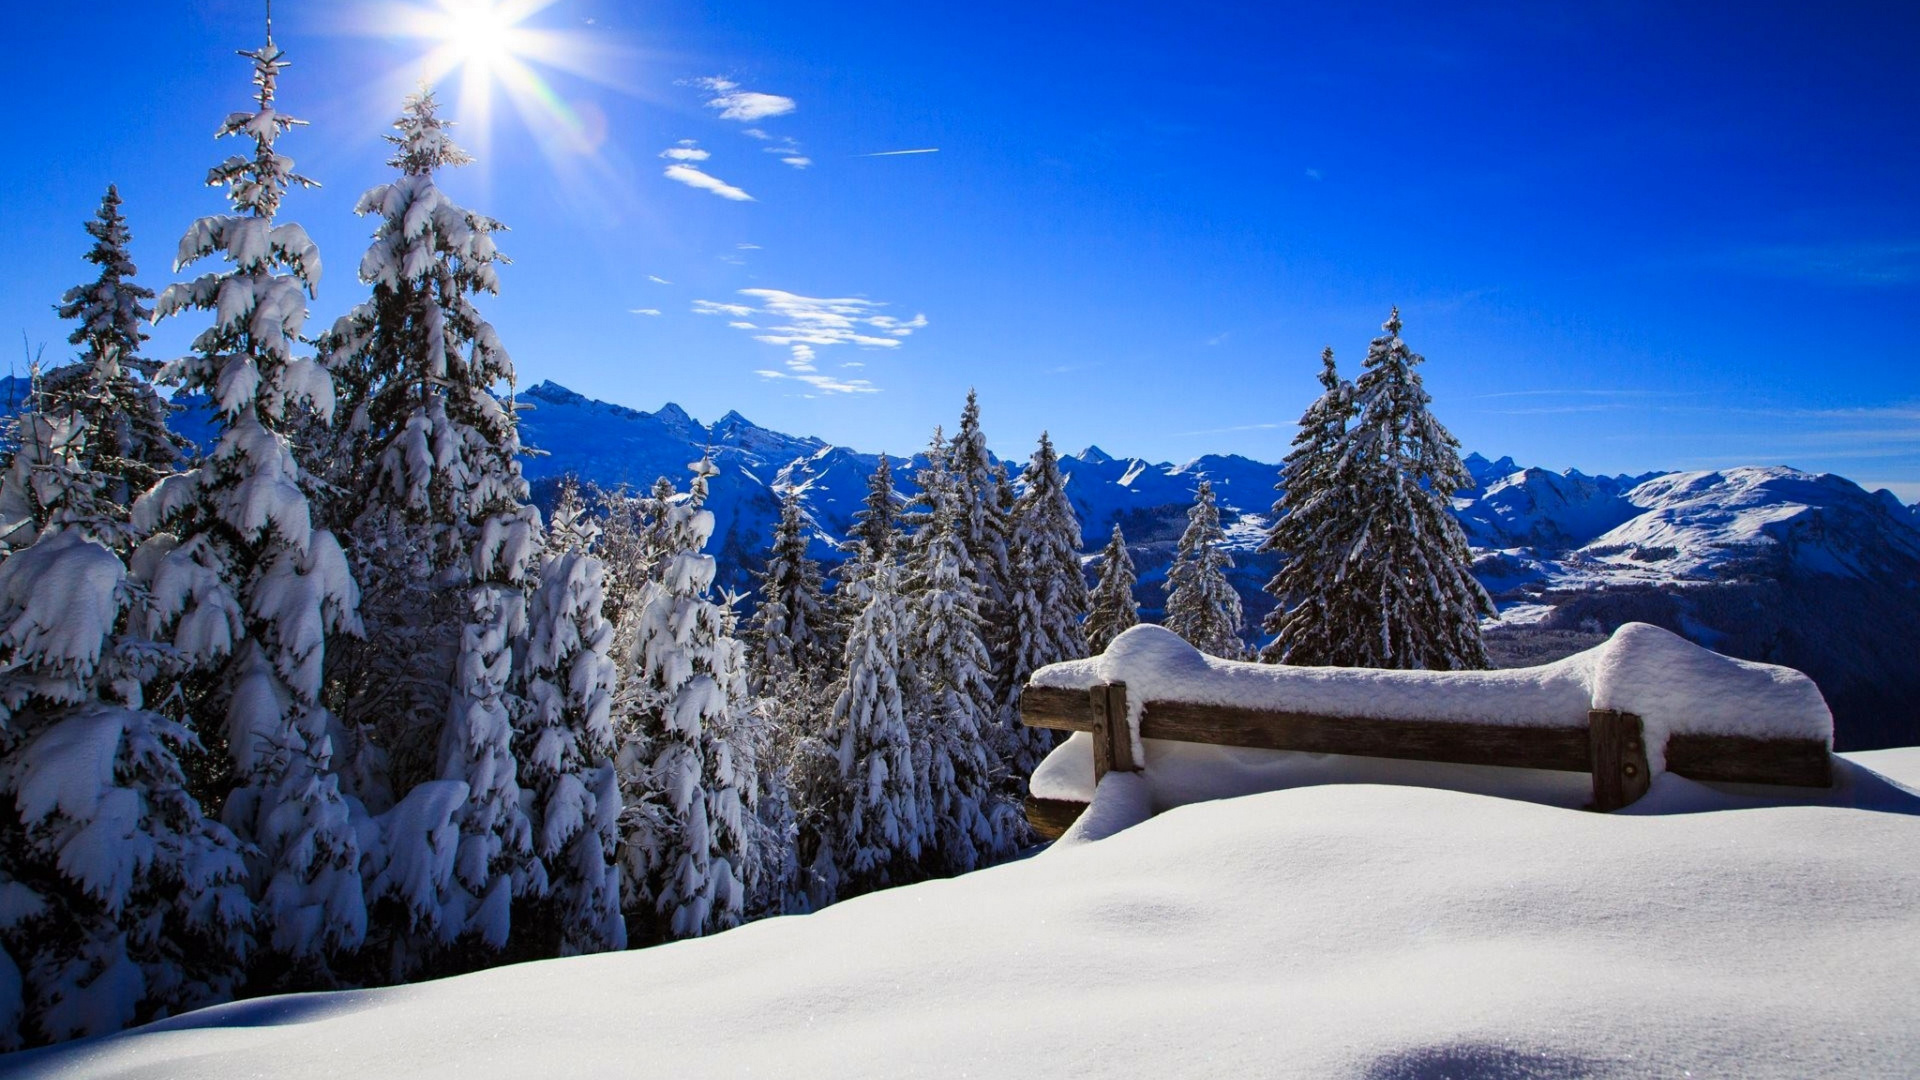 Snow Covered Trees and Mountains During Daytime. Wallpaper in 1920x1080 Resolution